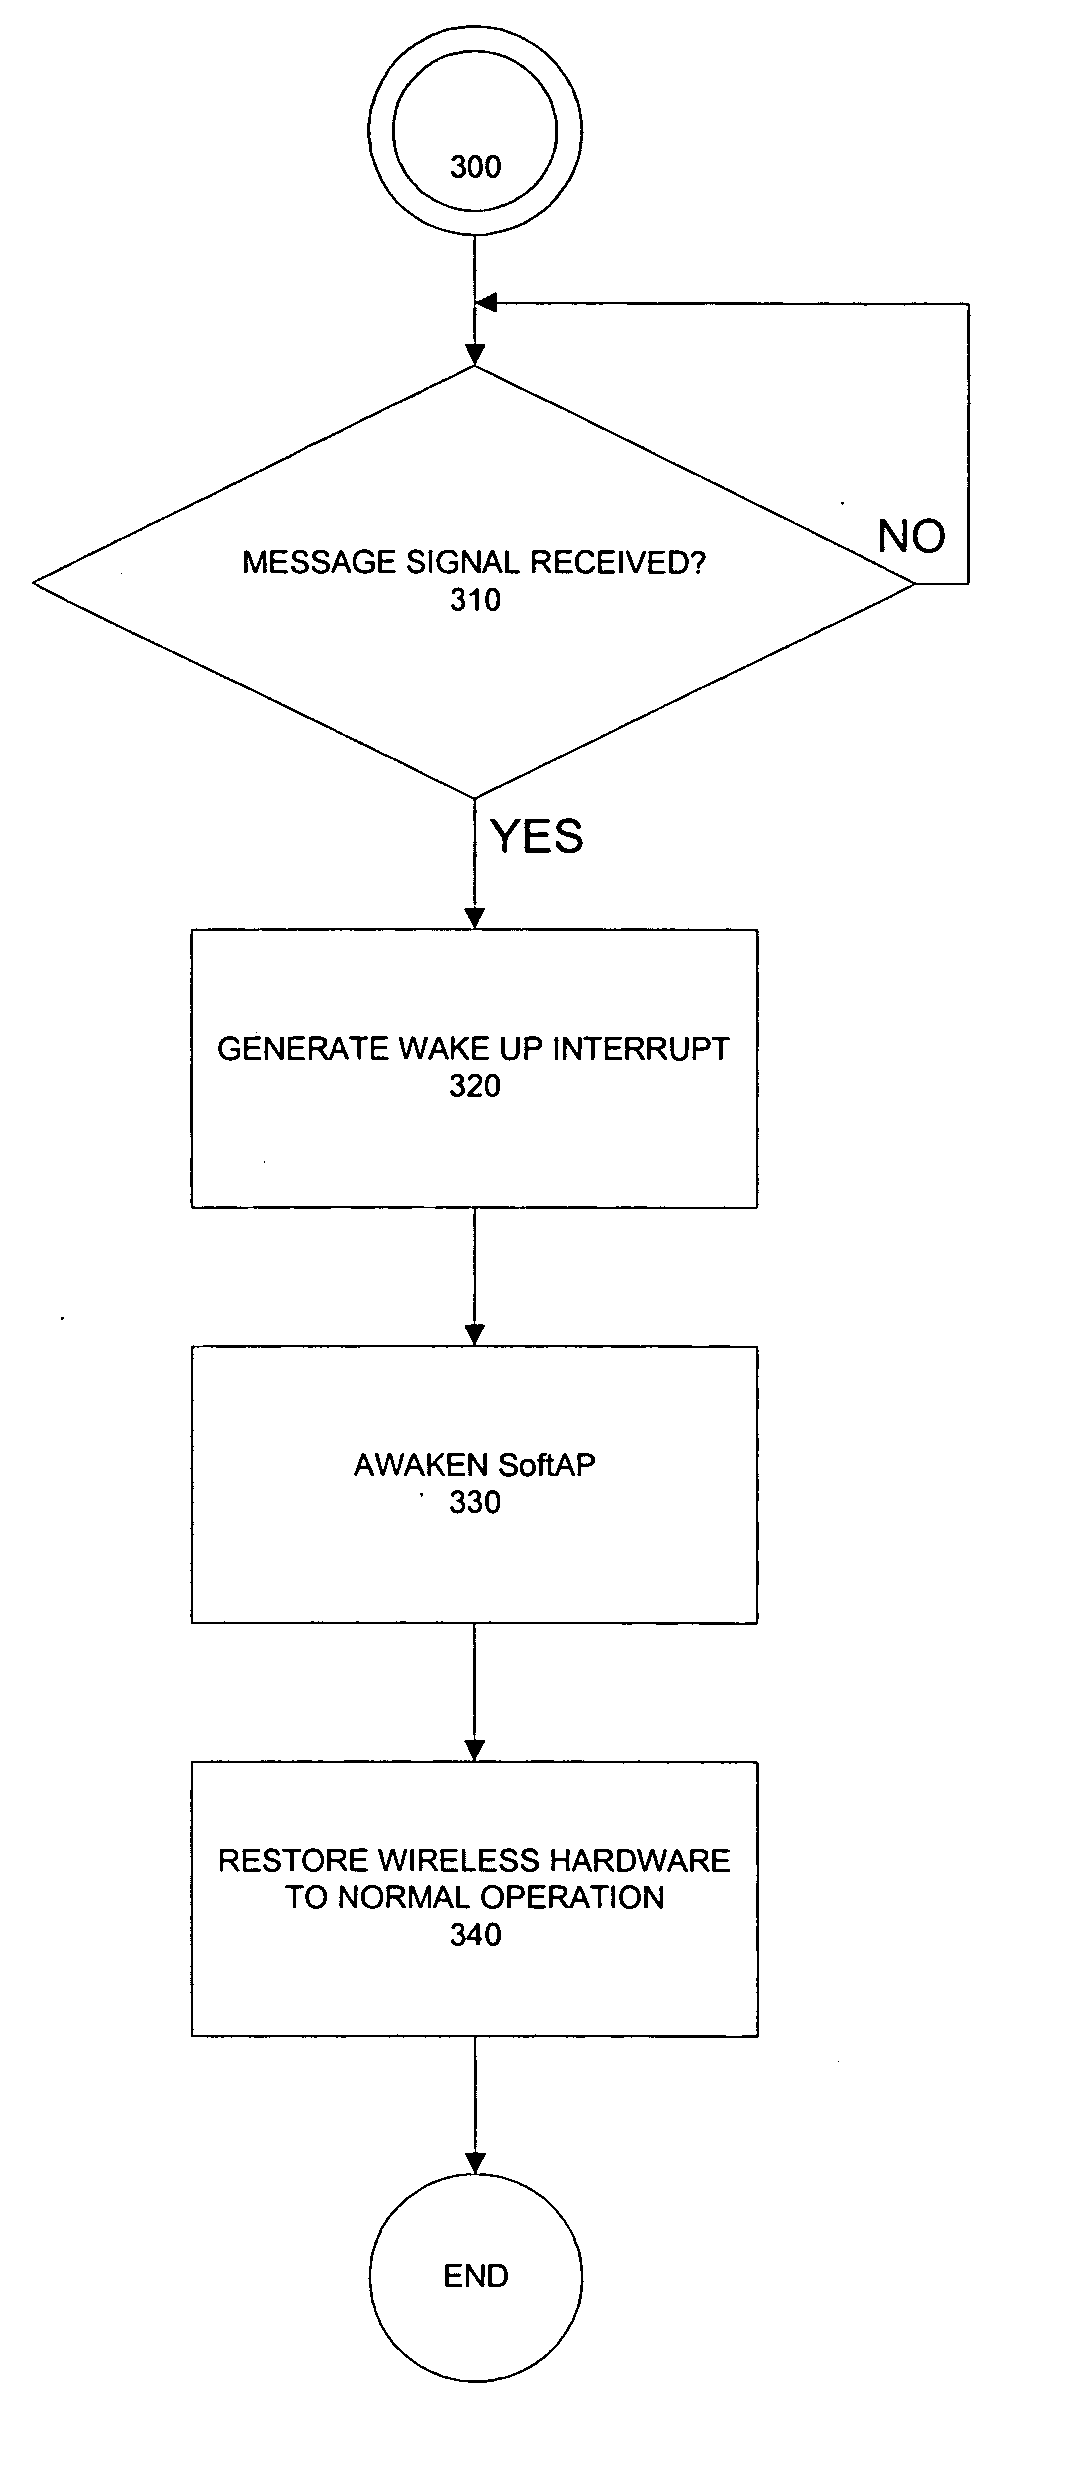 System and method for wake on wireless lan